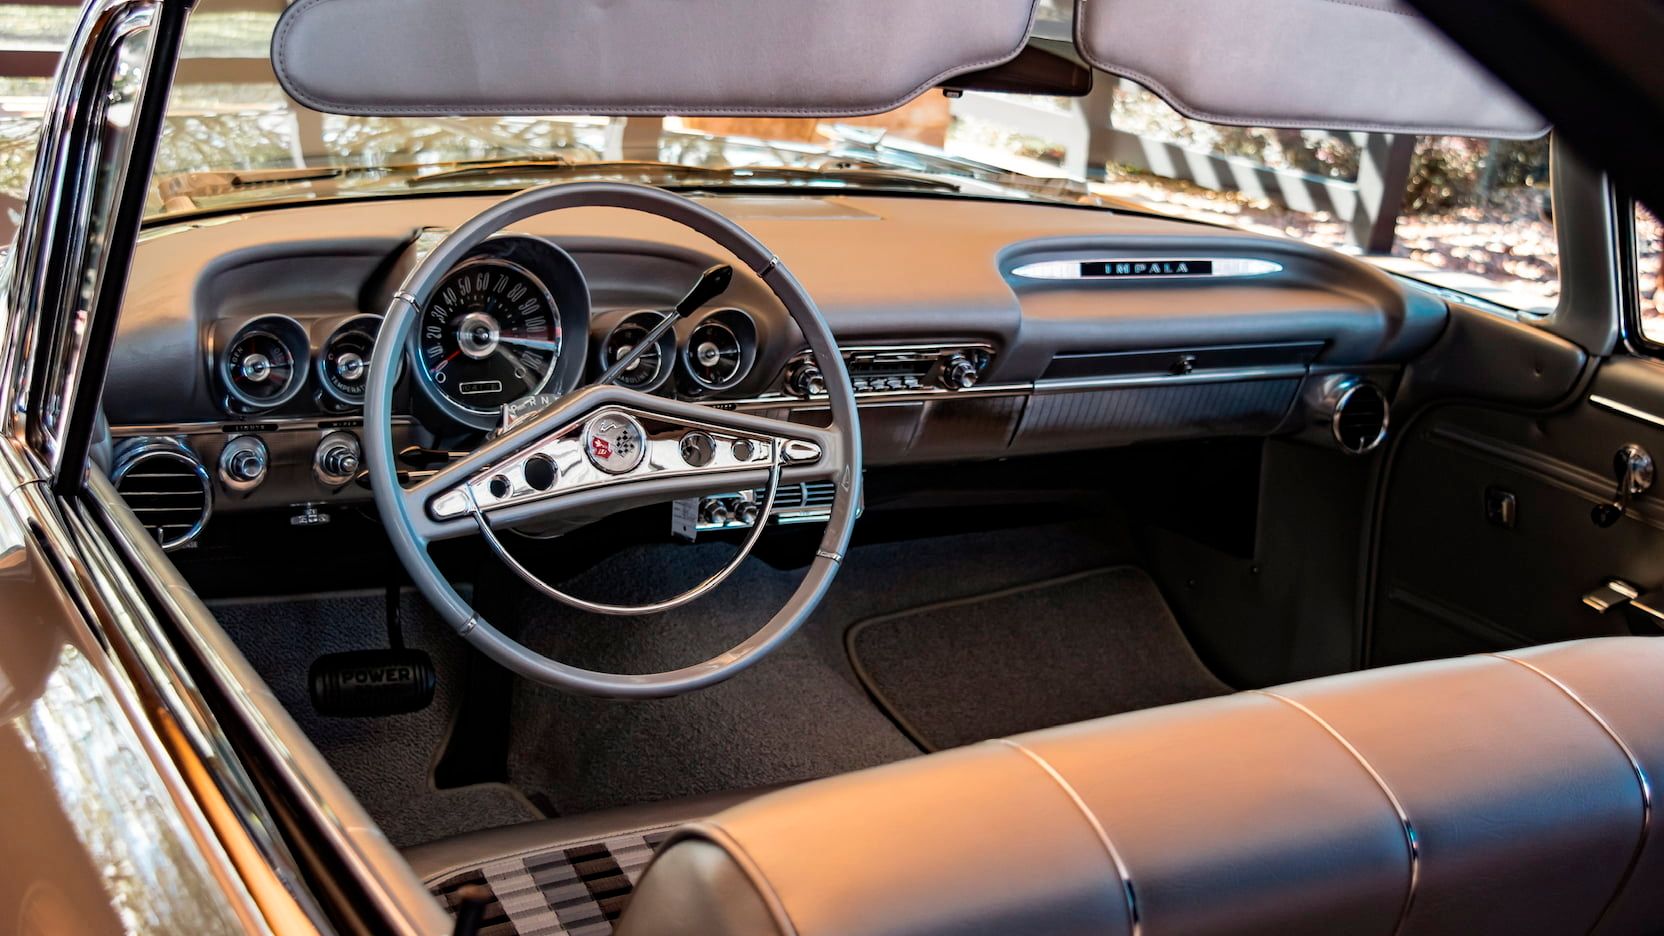 1959 Impala, interior view of driver's side